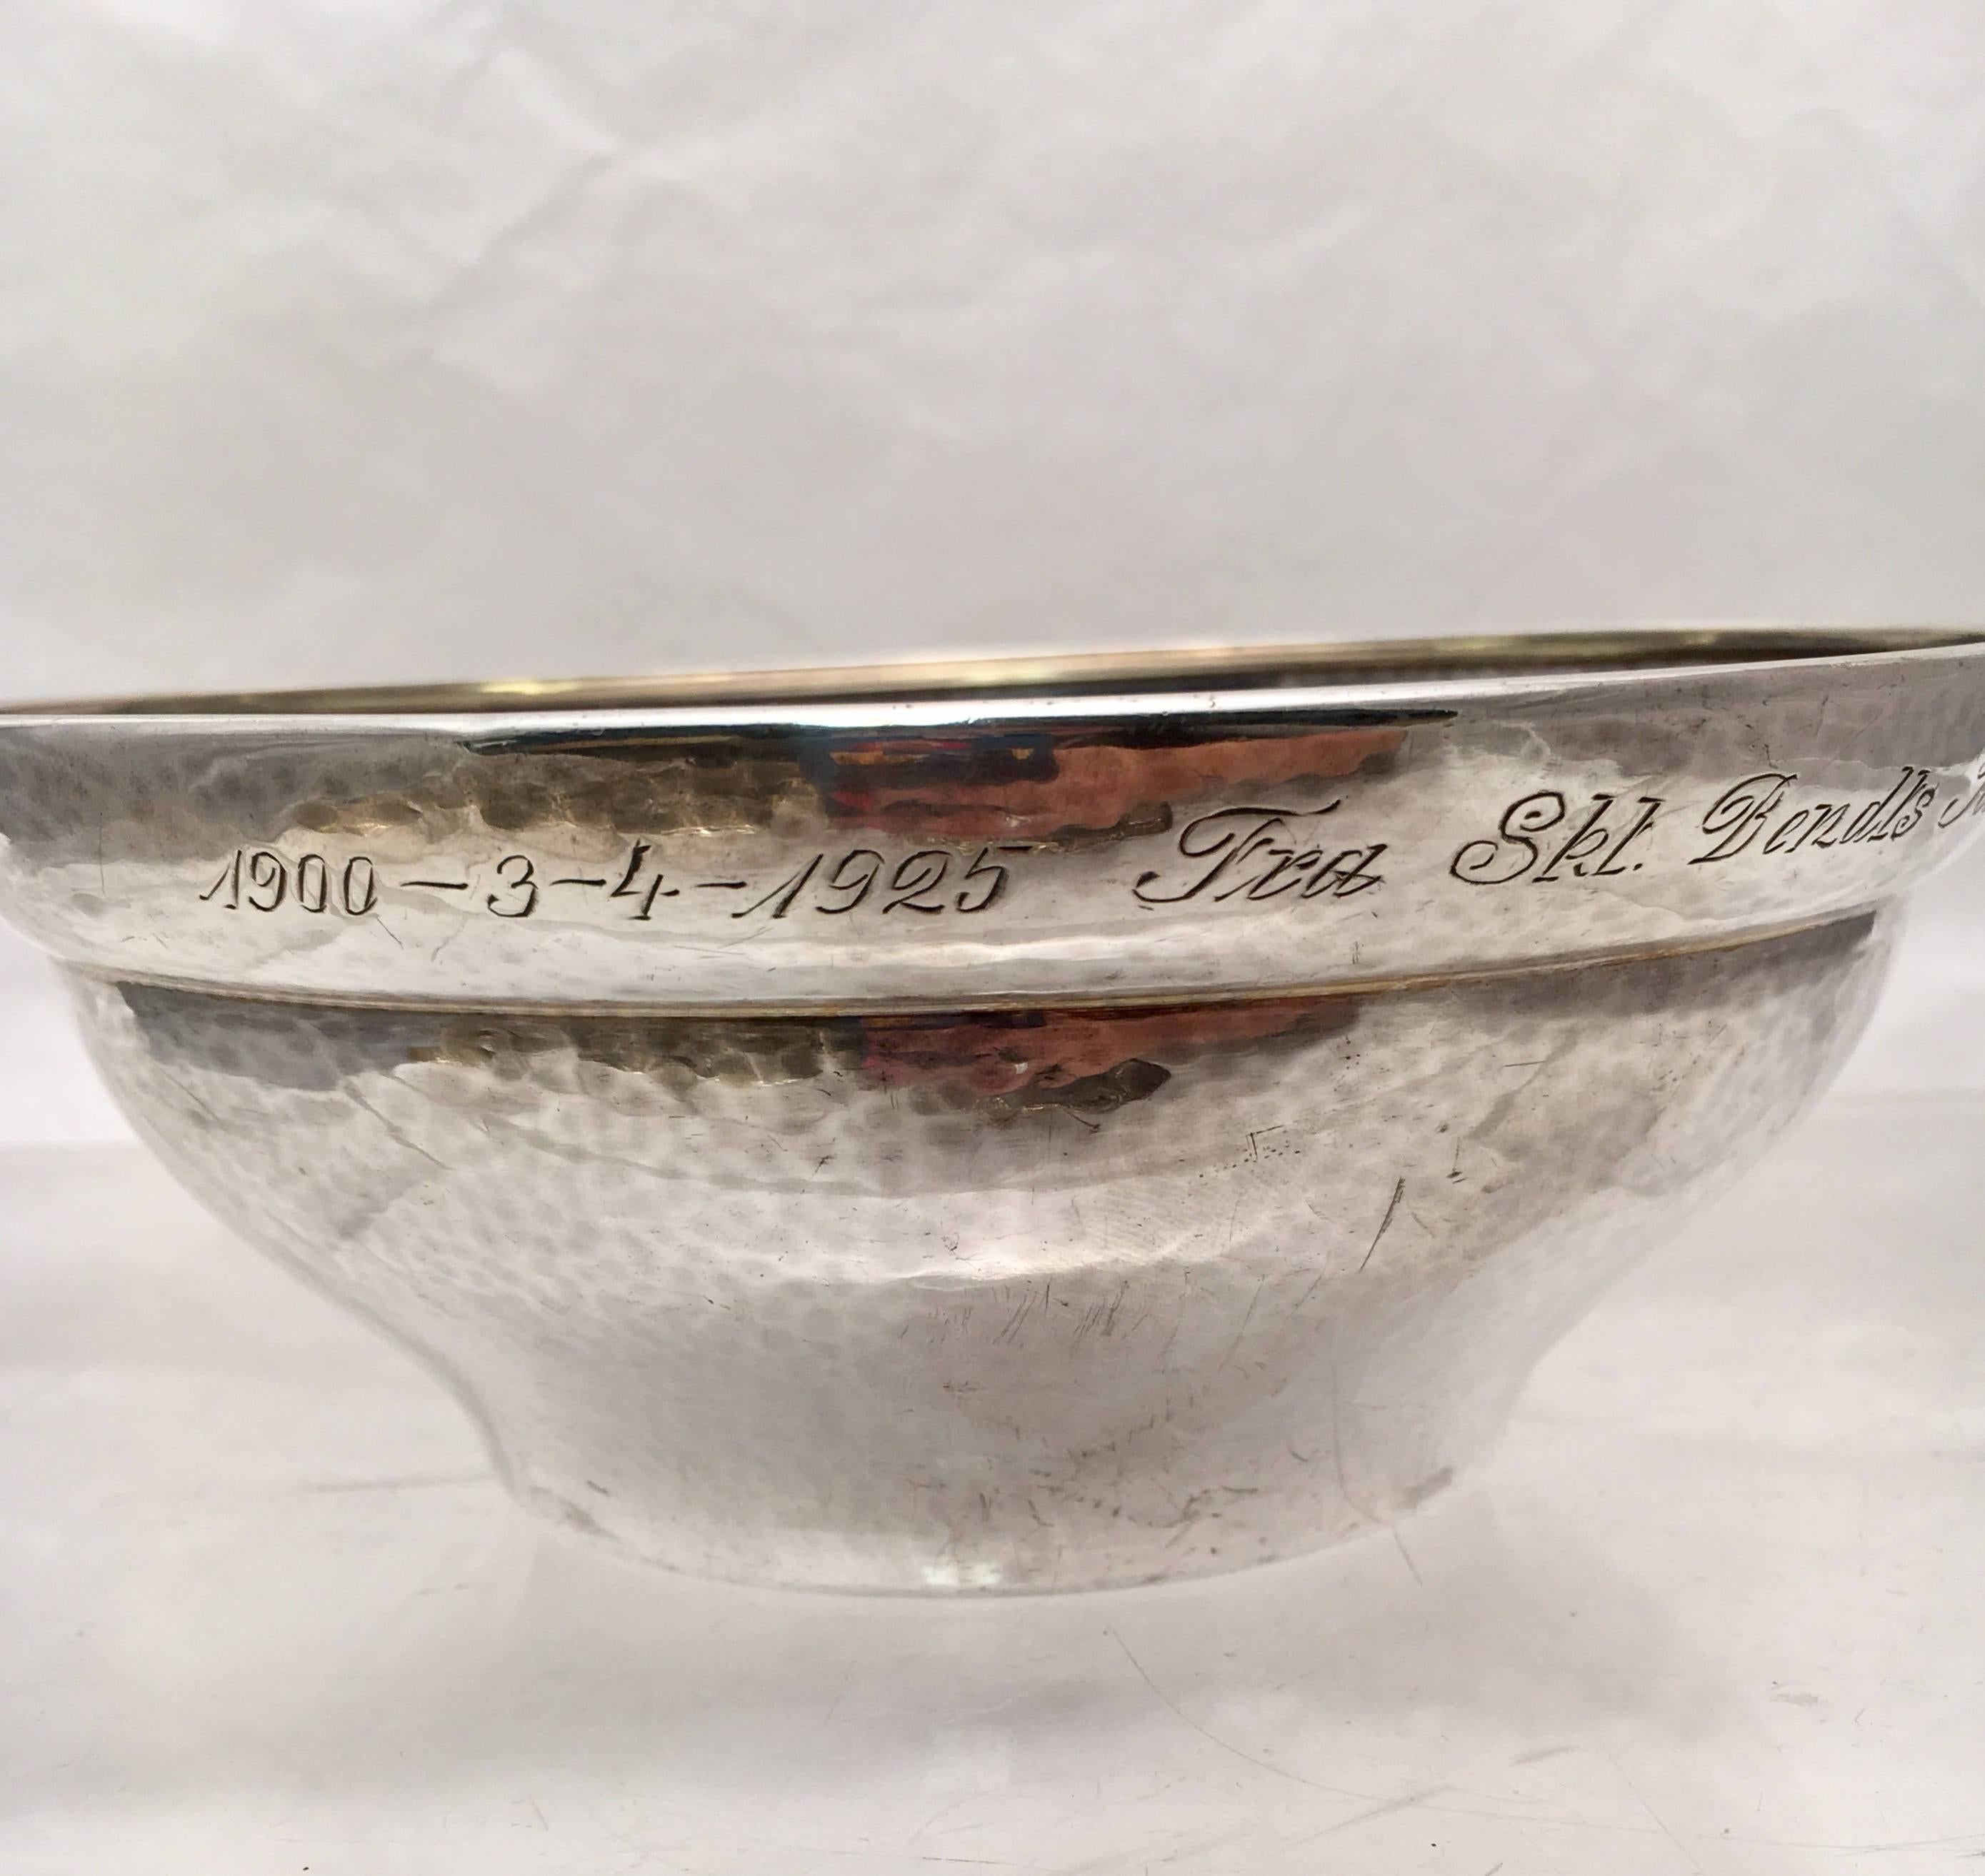 Early 20th century Georg Jensen Danish sterling silver fruit bowl / serving bowl in pattern #416. Beautifully hand hammered. Wide round rim. Engraved on the side of the bowl is 